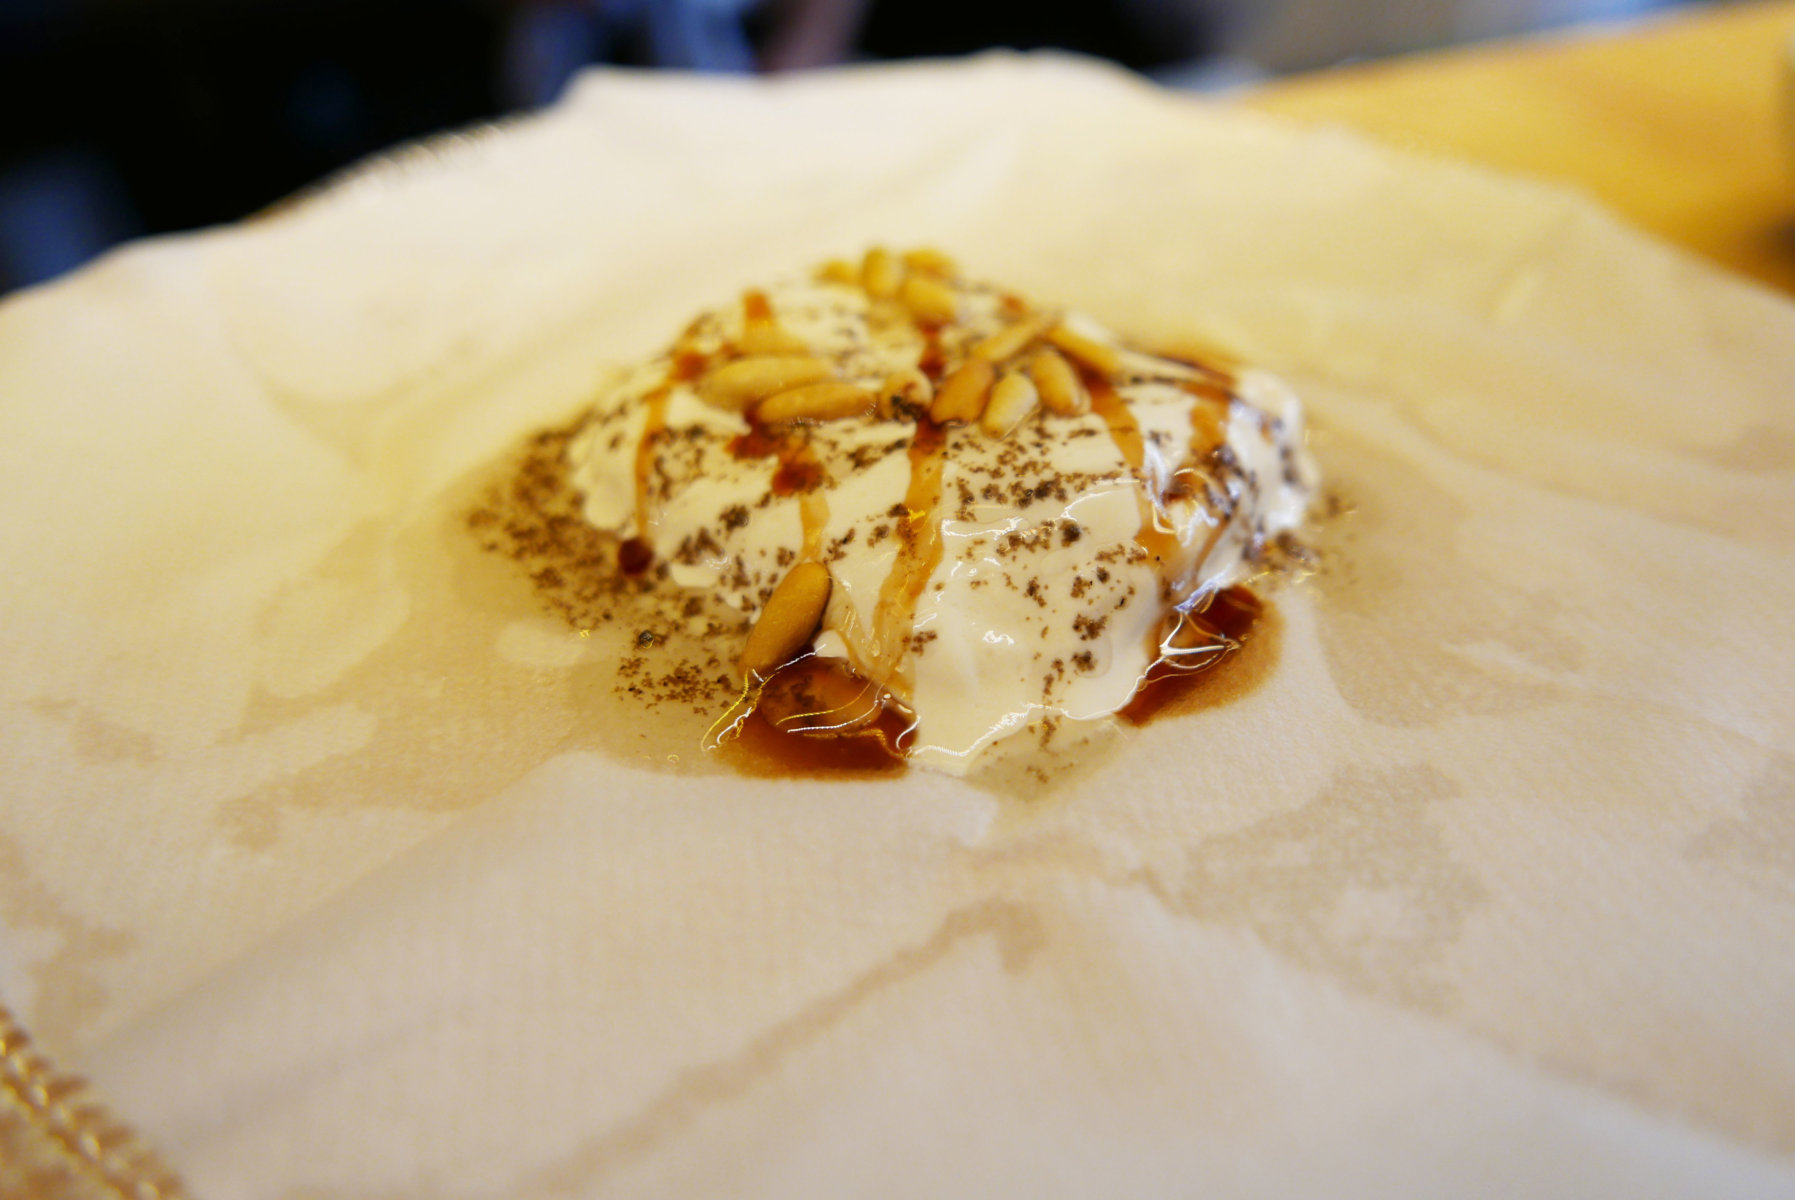 and almond "recuit de drap" with truffle, honey, fir tree and pine nuts.